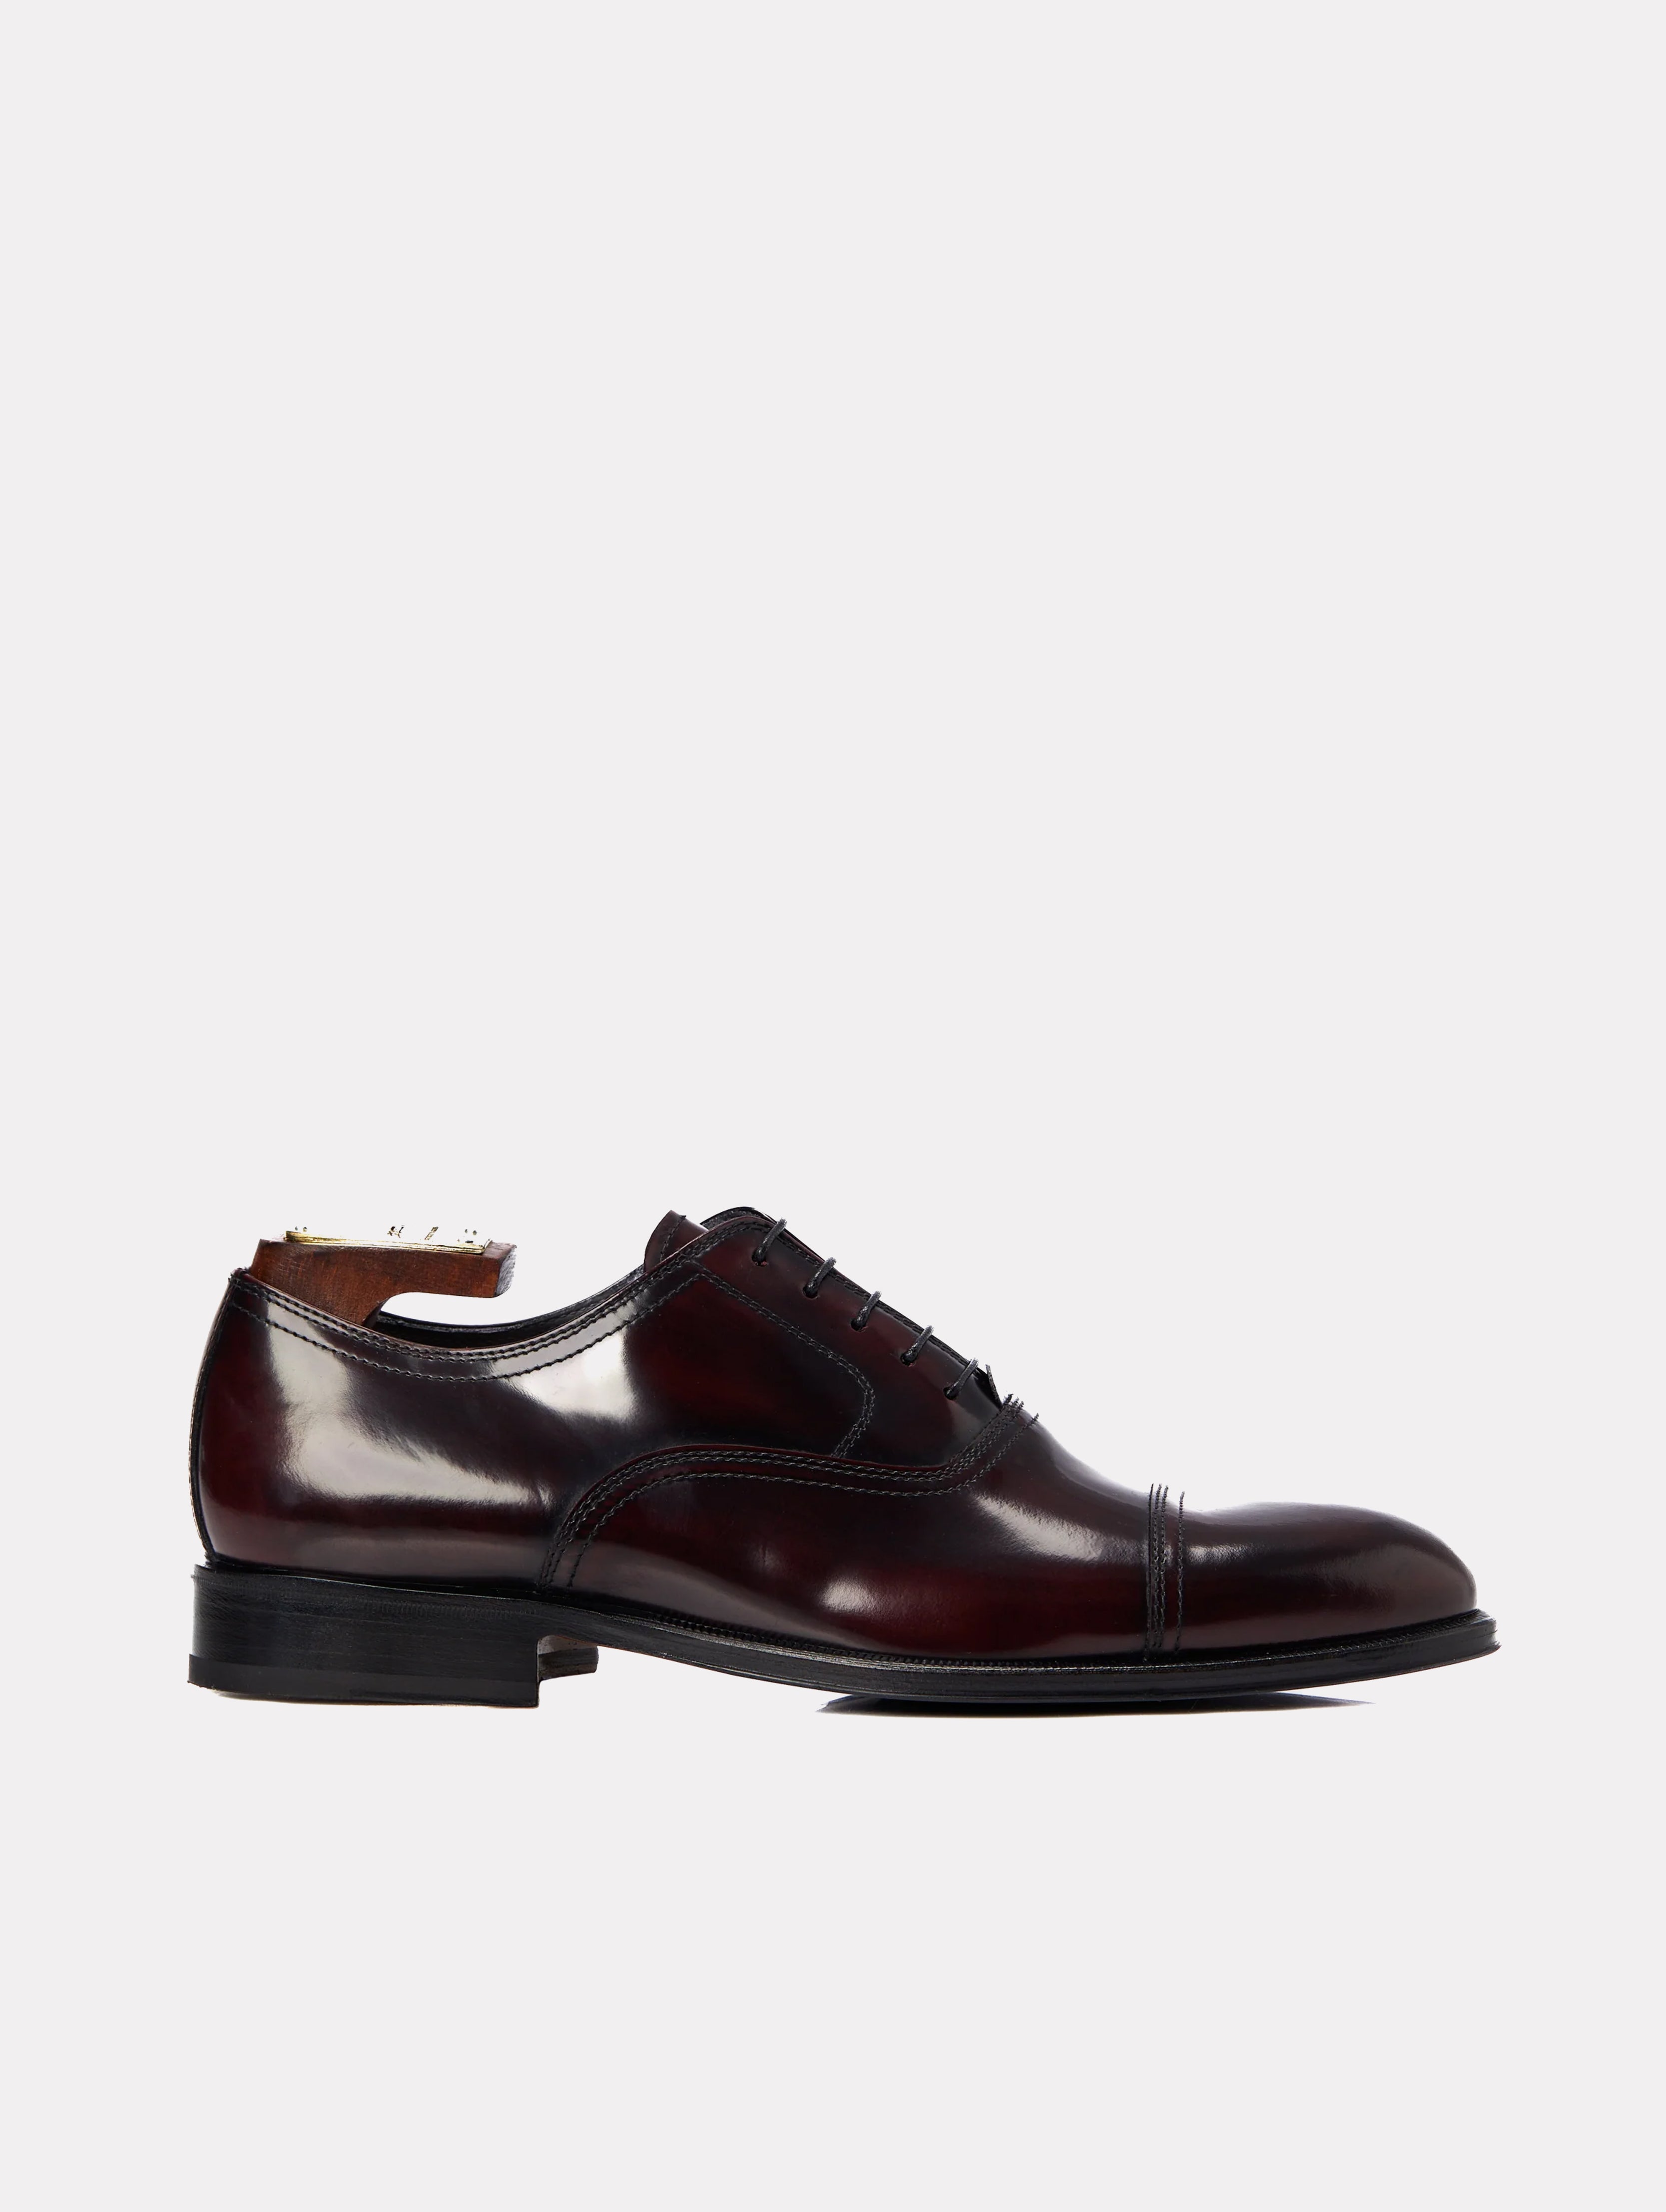 Wine oxford shoes